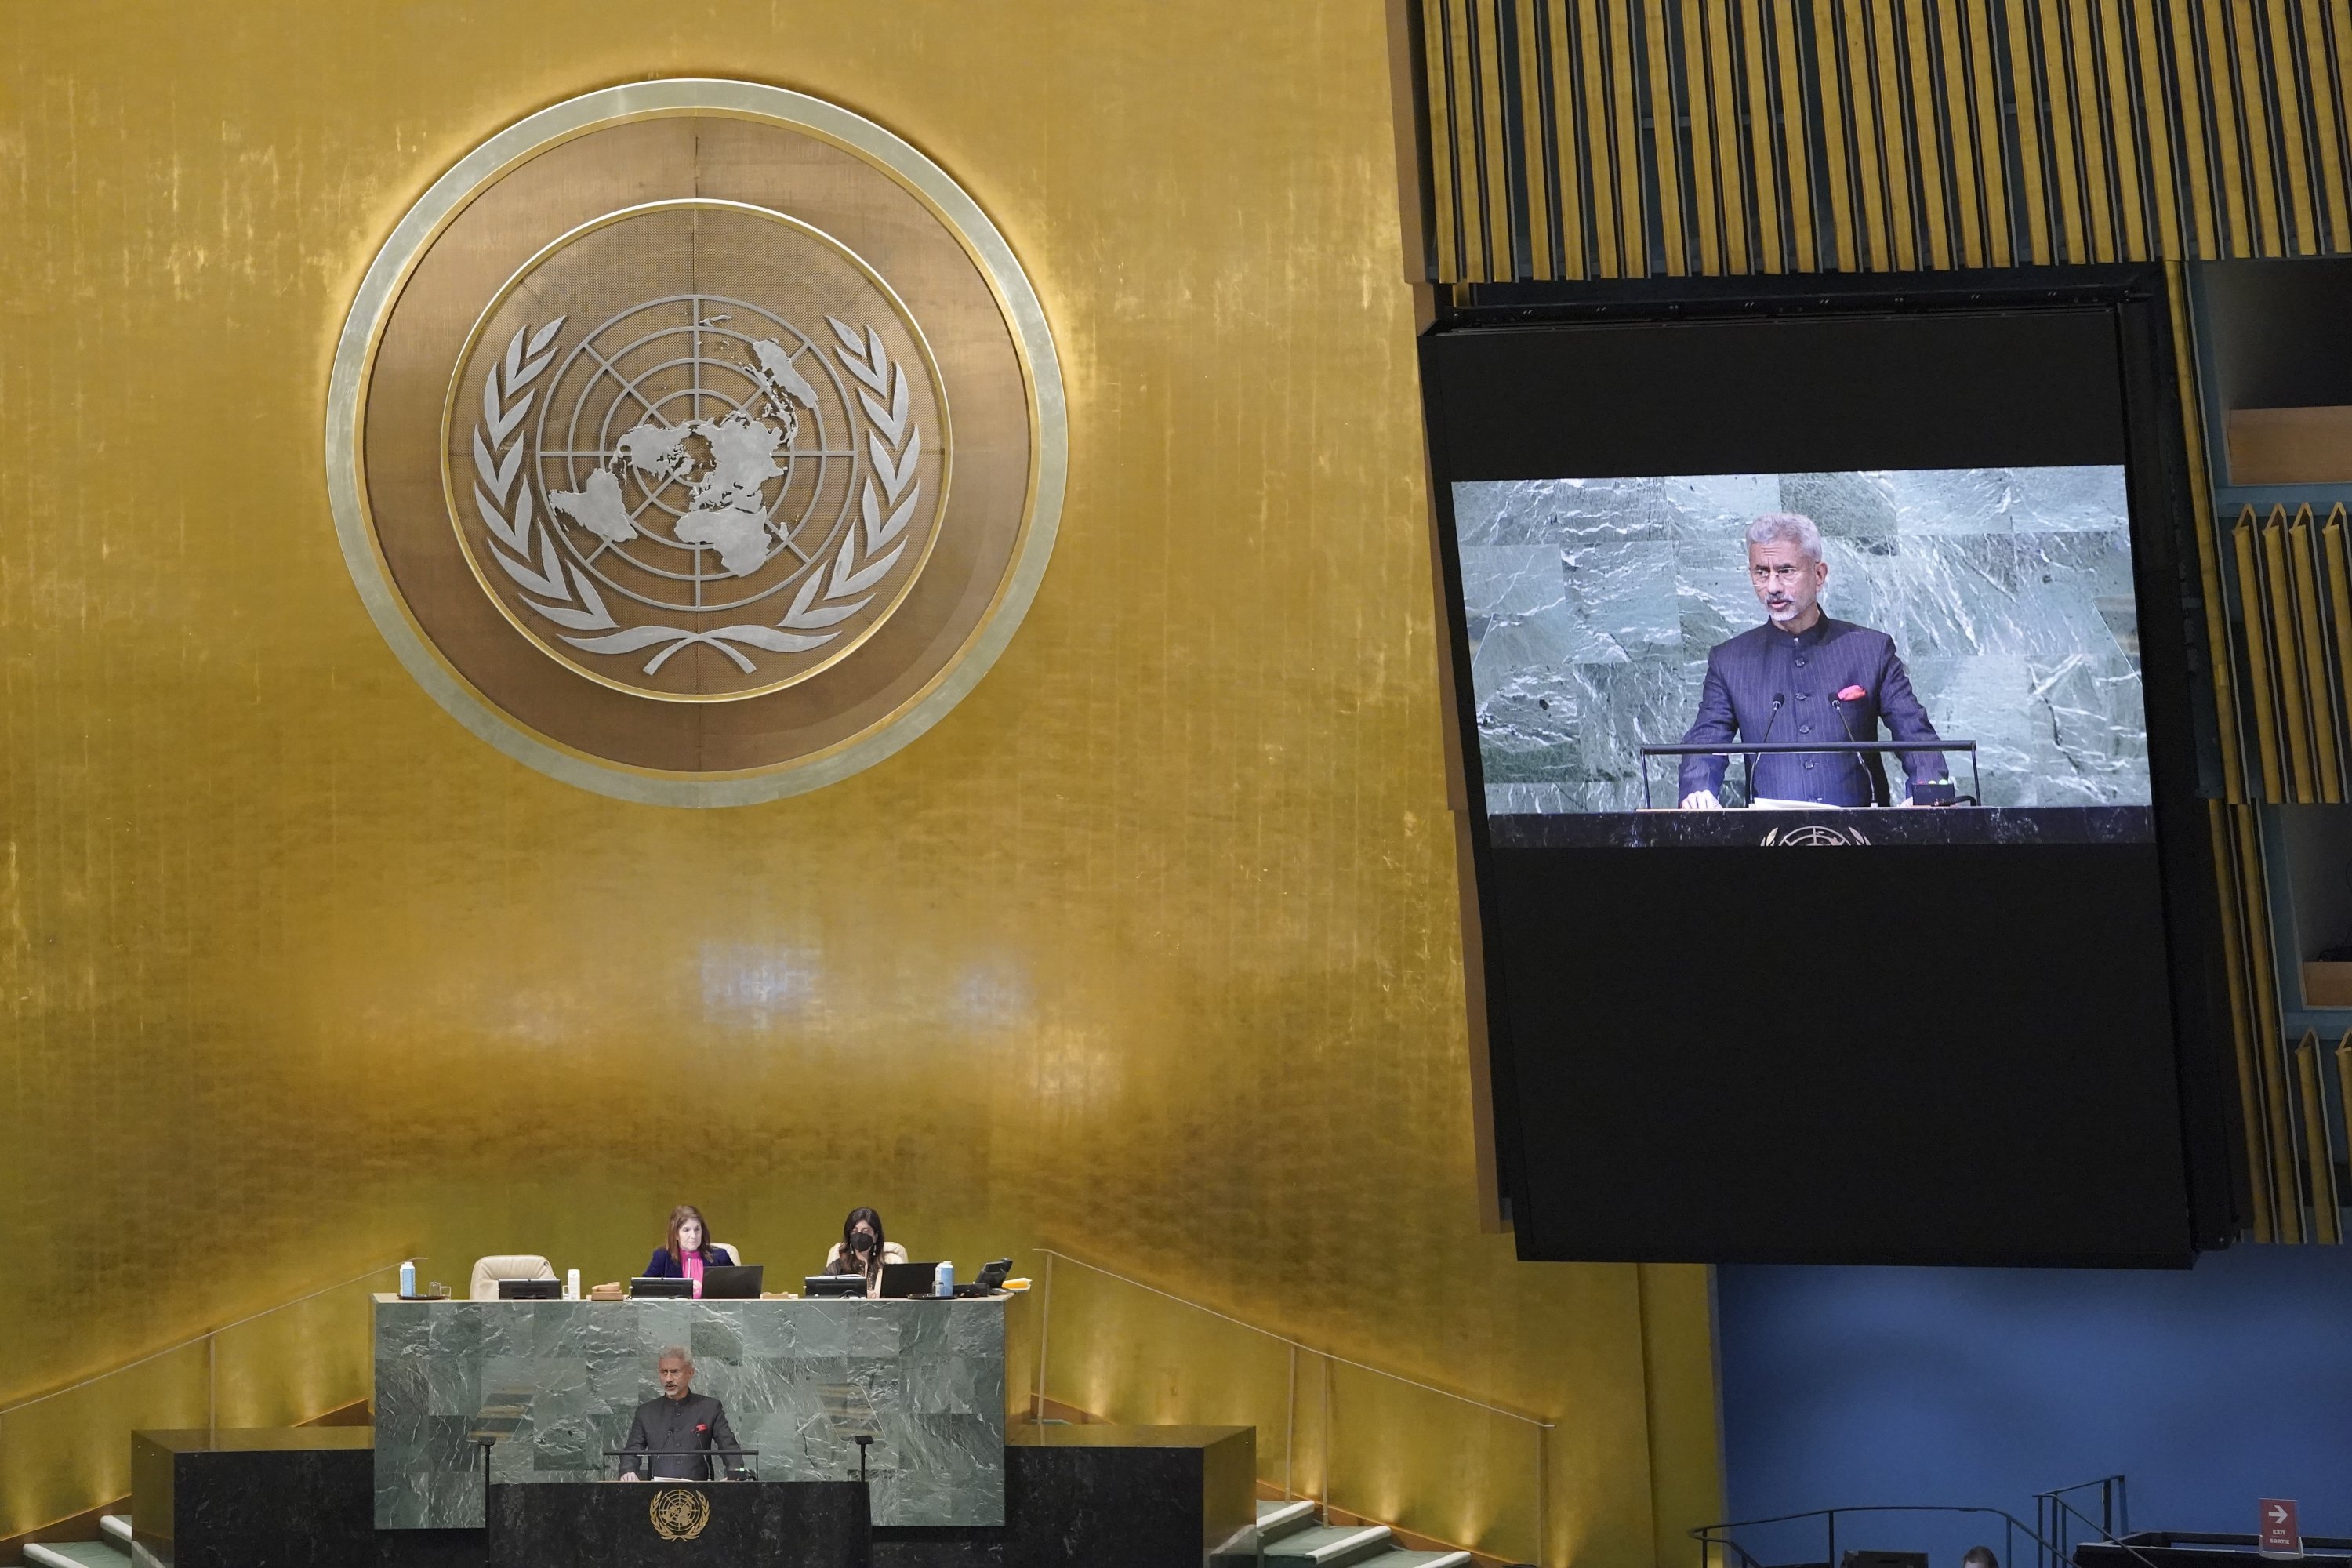 India's Foreign Minister Subrahmanyam Jaishankar addresses the 77th session of the U.N. General Assembly, New York, U.S., Sept. 24, 2022. (AP Photo)